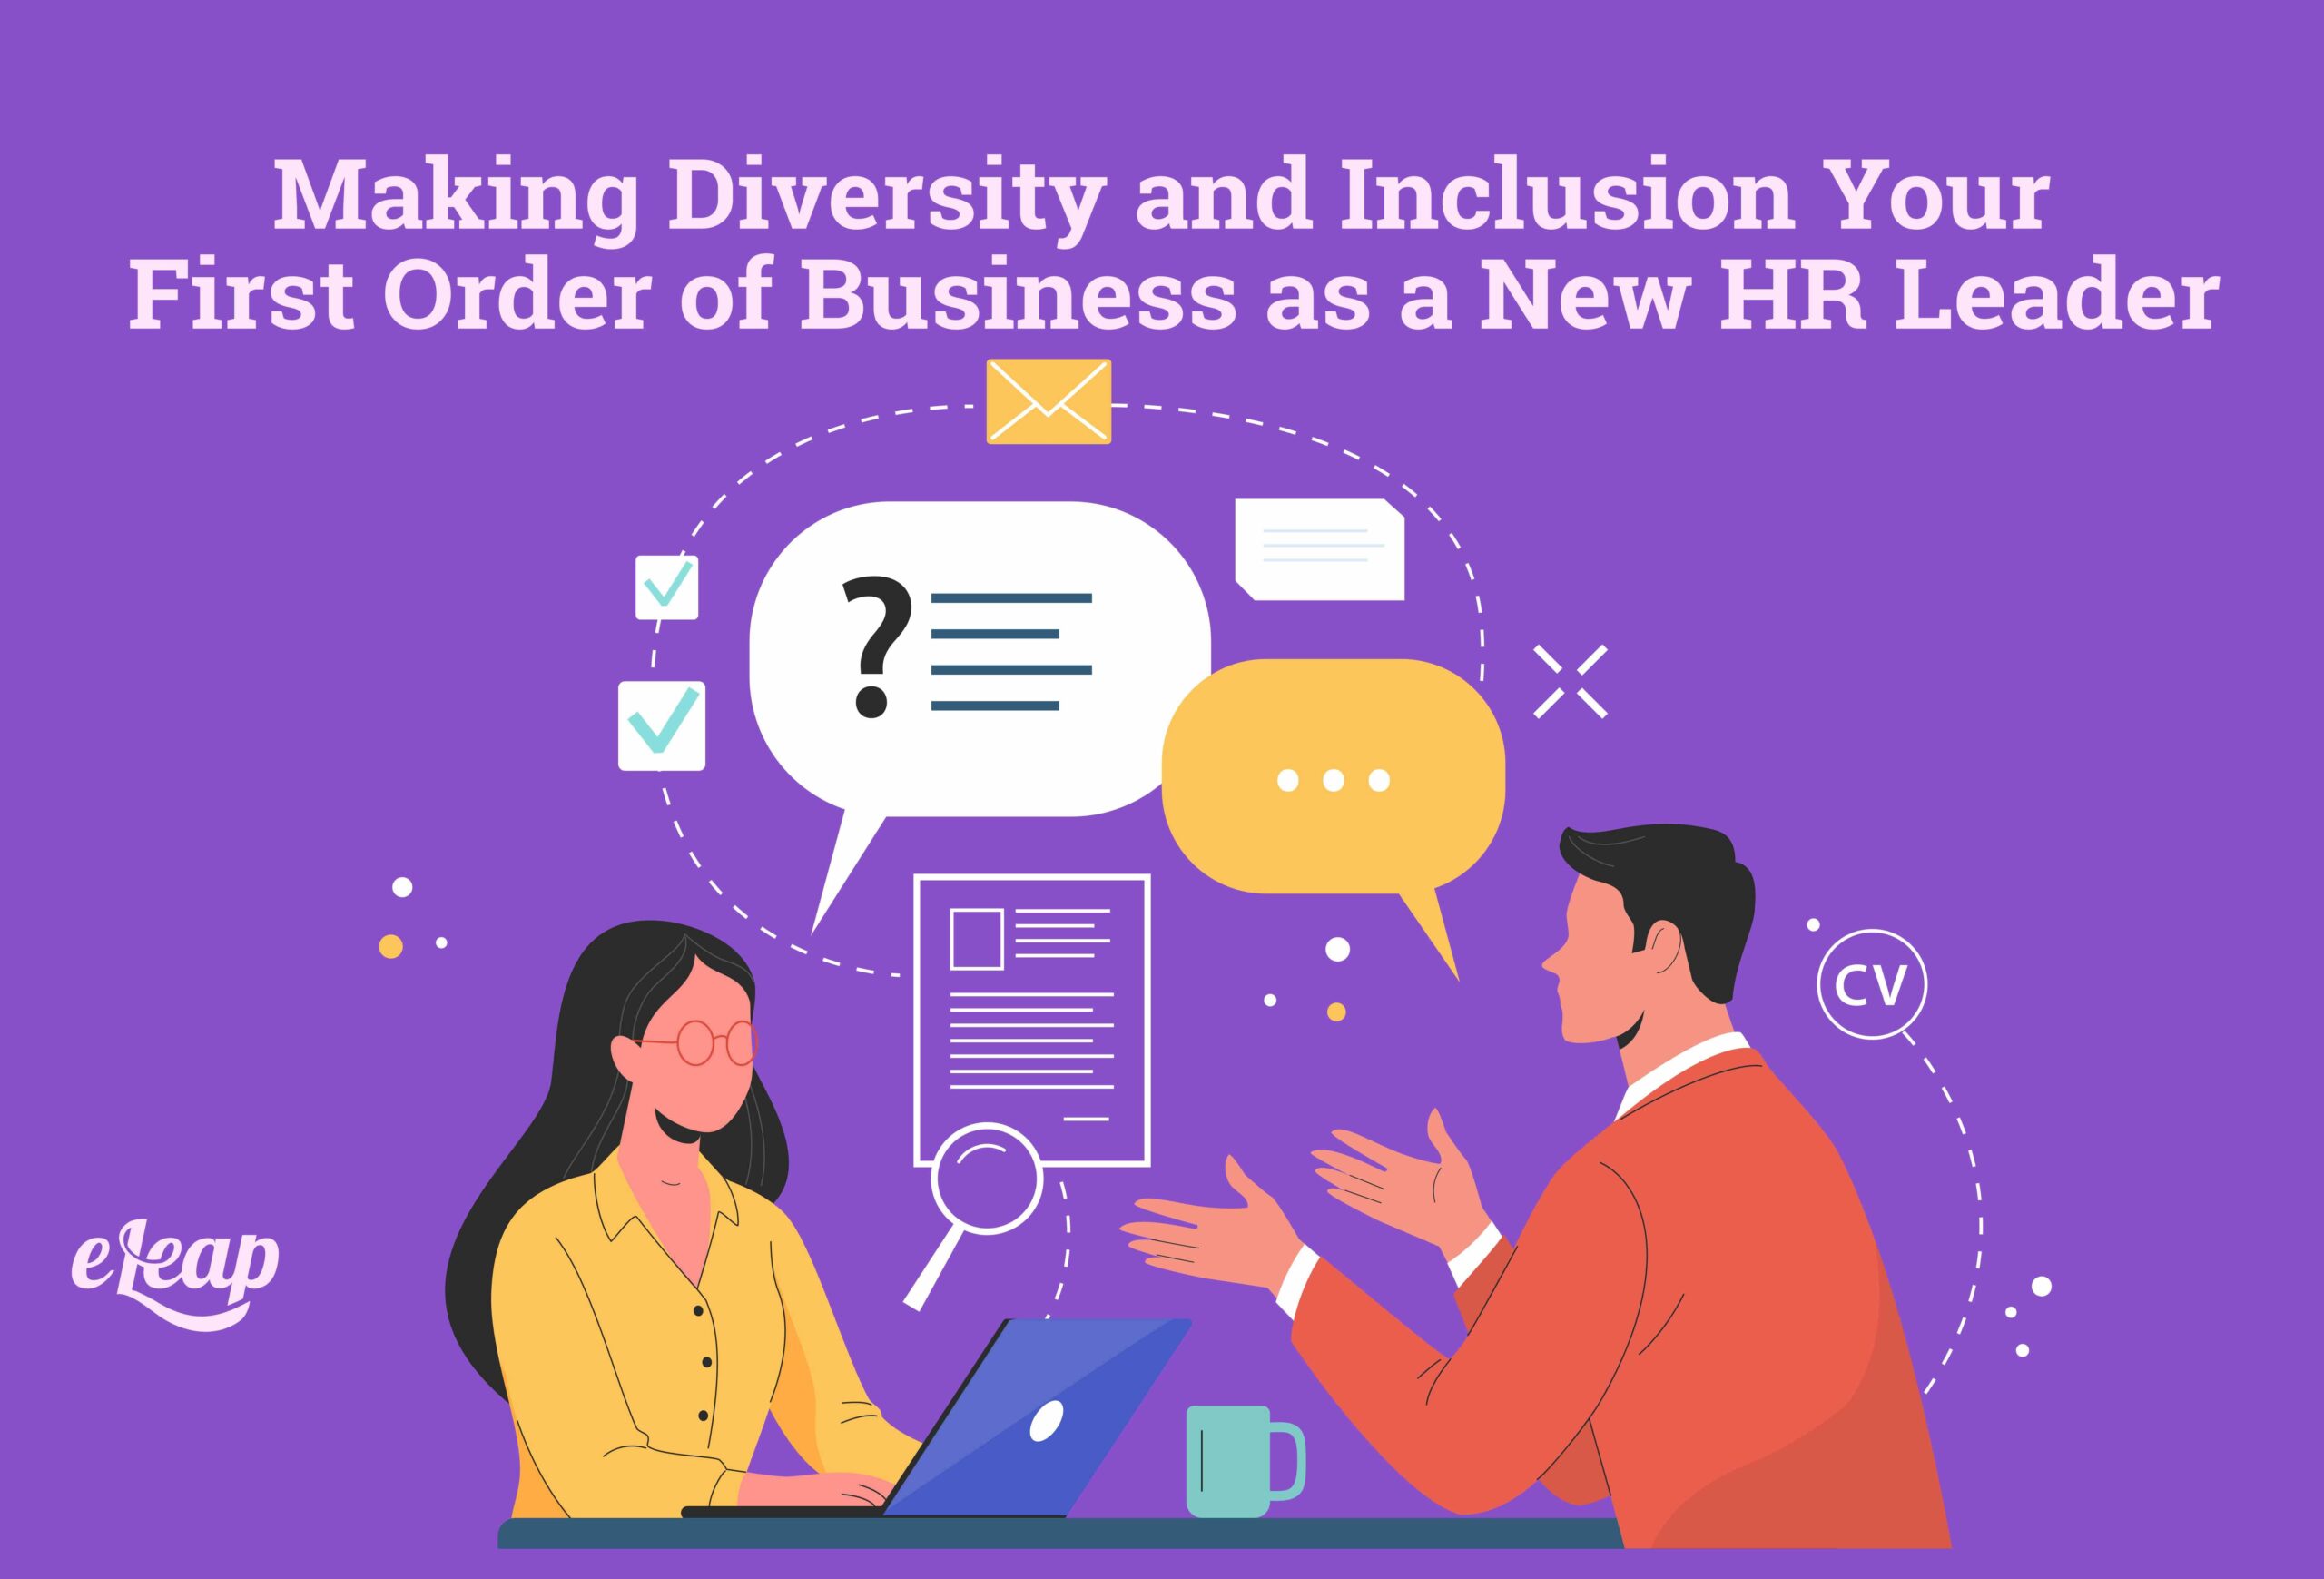 Making Diversity and Inclusion Your First Order of Business as a New HR Leader